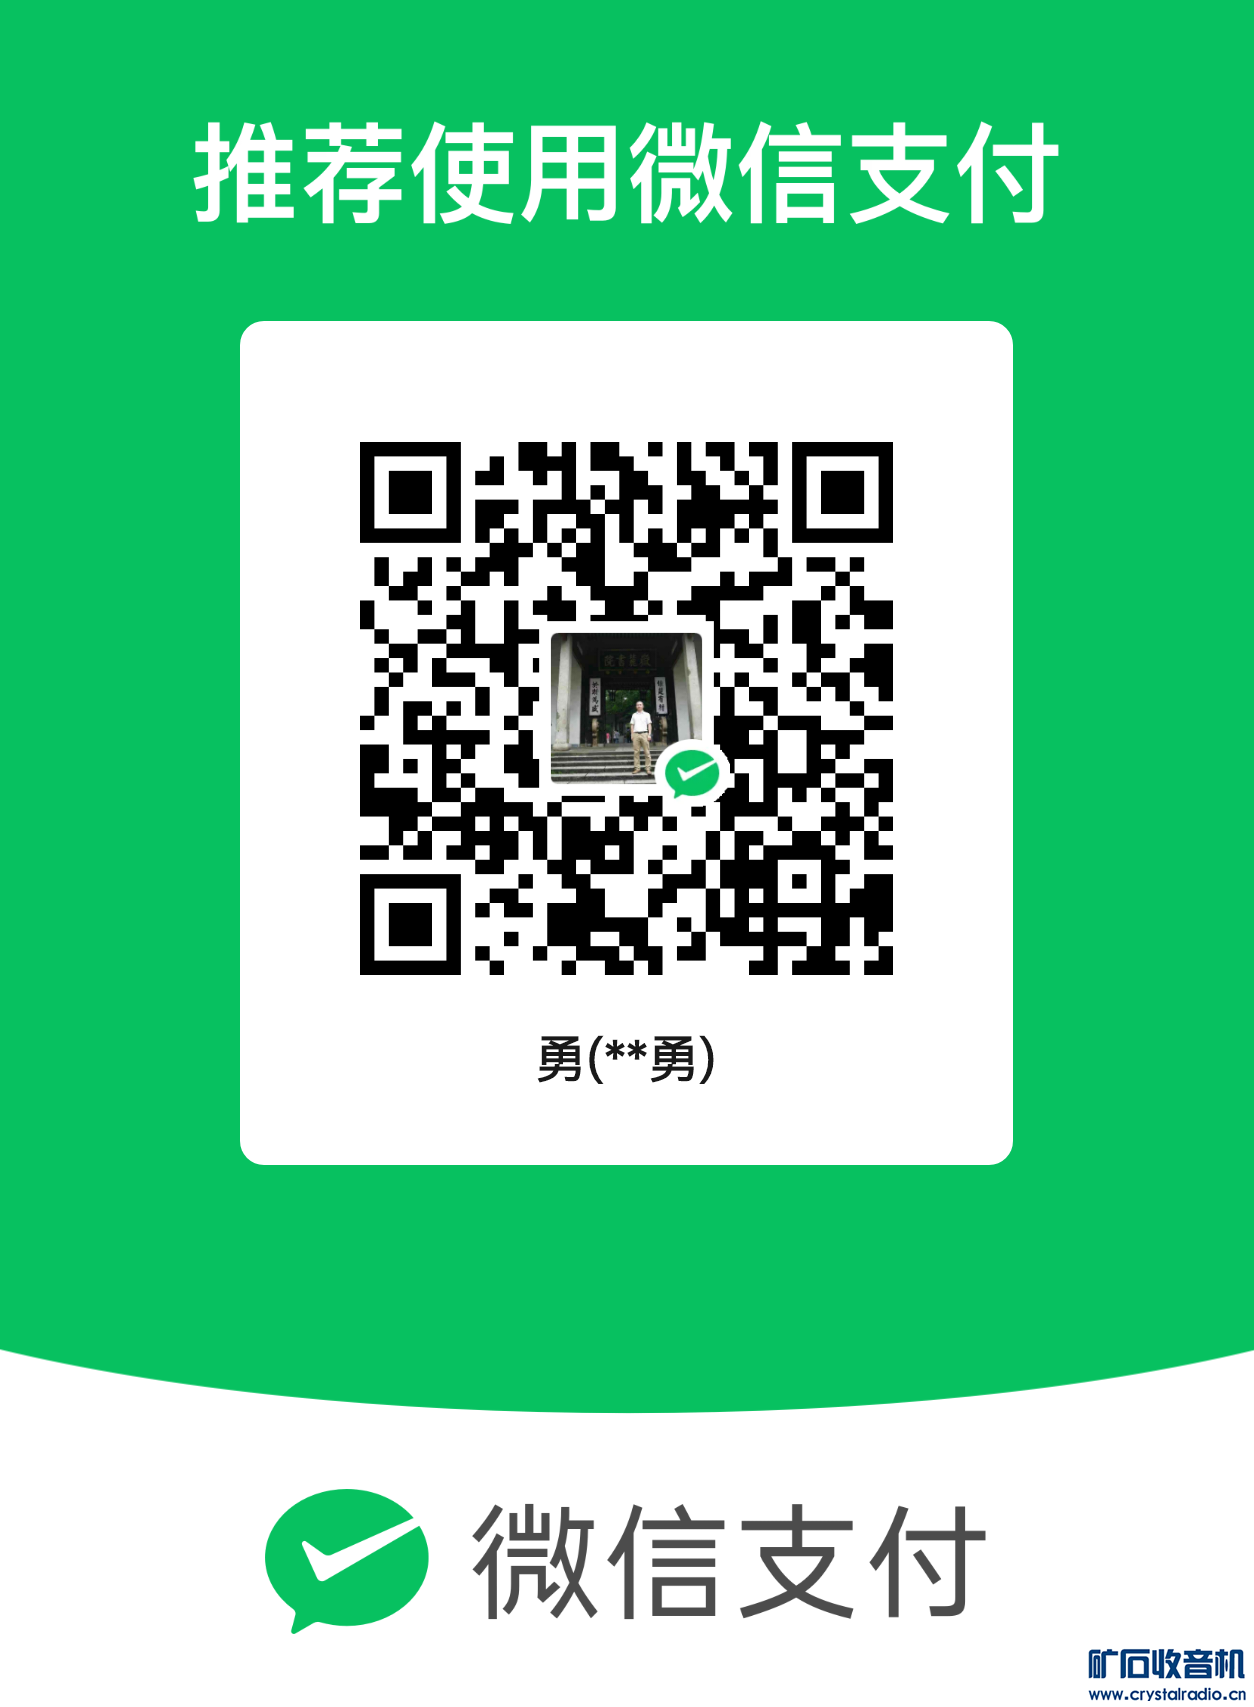 mm_facetoface_collect_qrcode_1702709241293.png